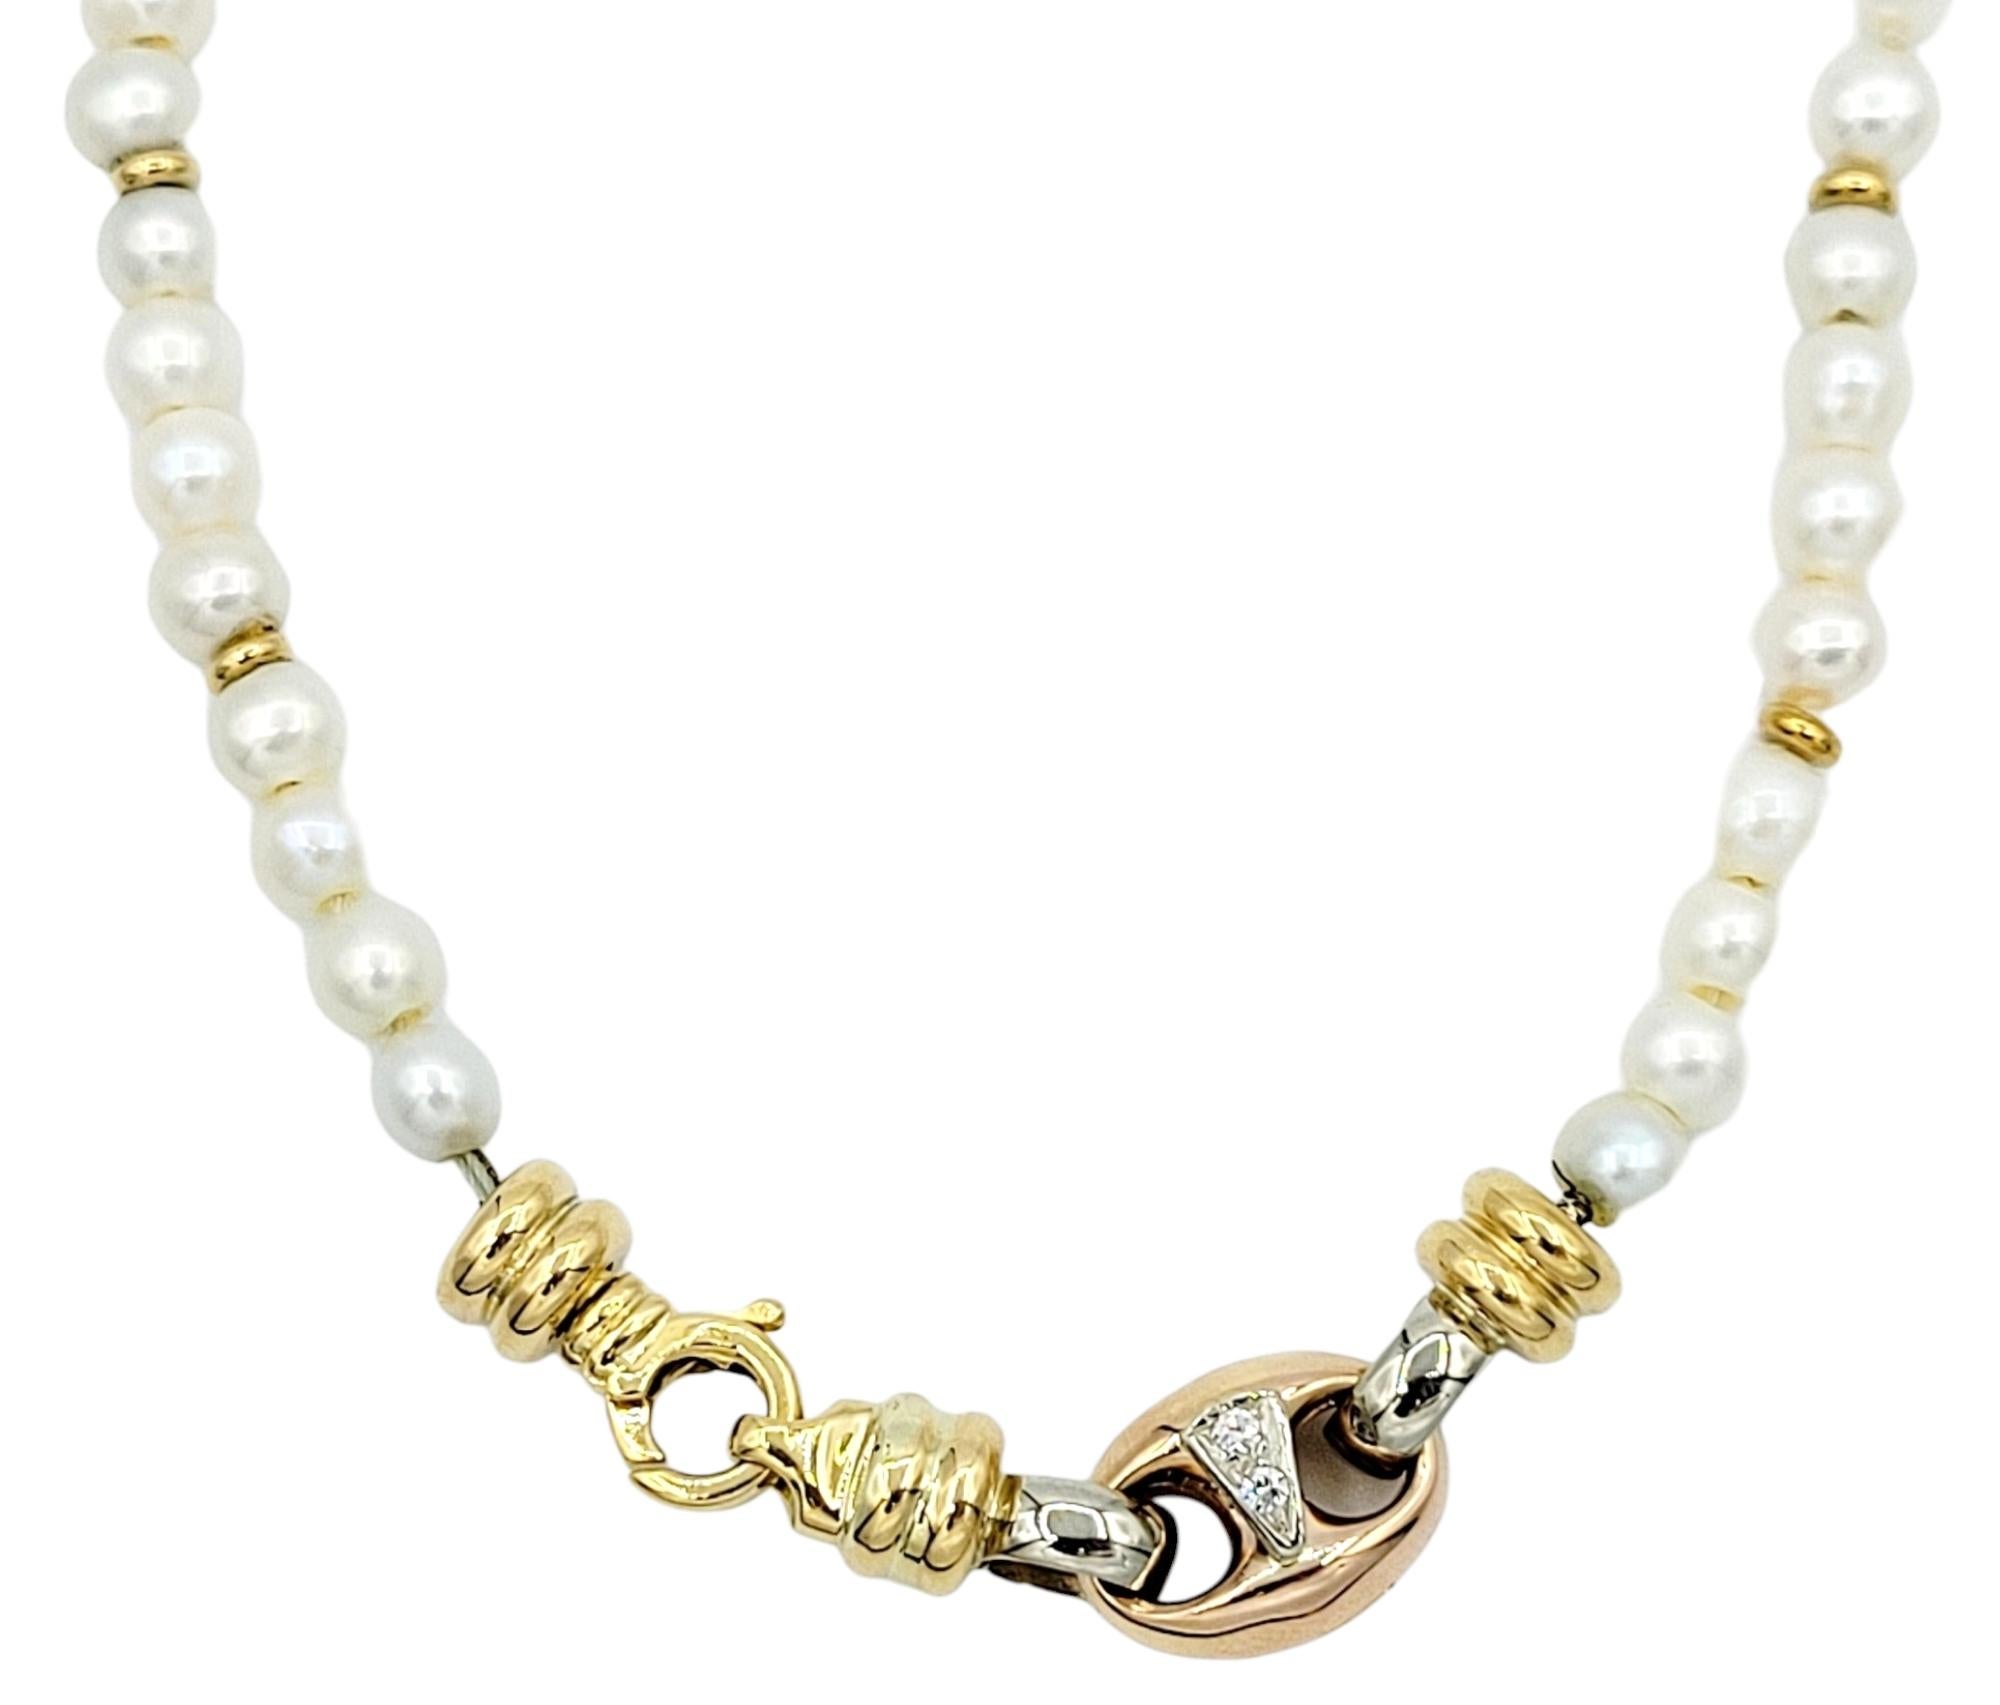 This exquisite Akoya cultured pearl and gold disc station necklace is crafted in 18-karat yellow and rose gold. This elegant piece features a unique design with 80 lustrous pearls bead-set and embellished with round gold discs, adding a touch of